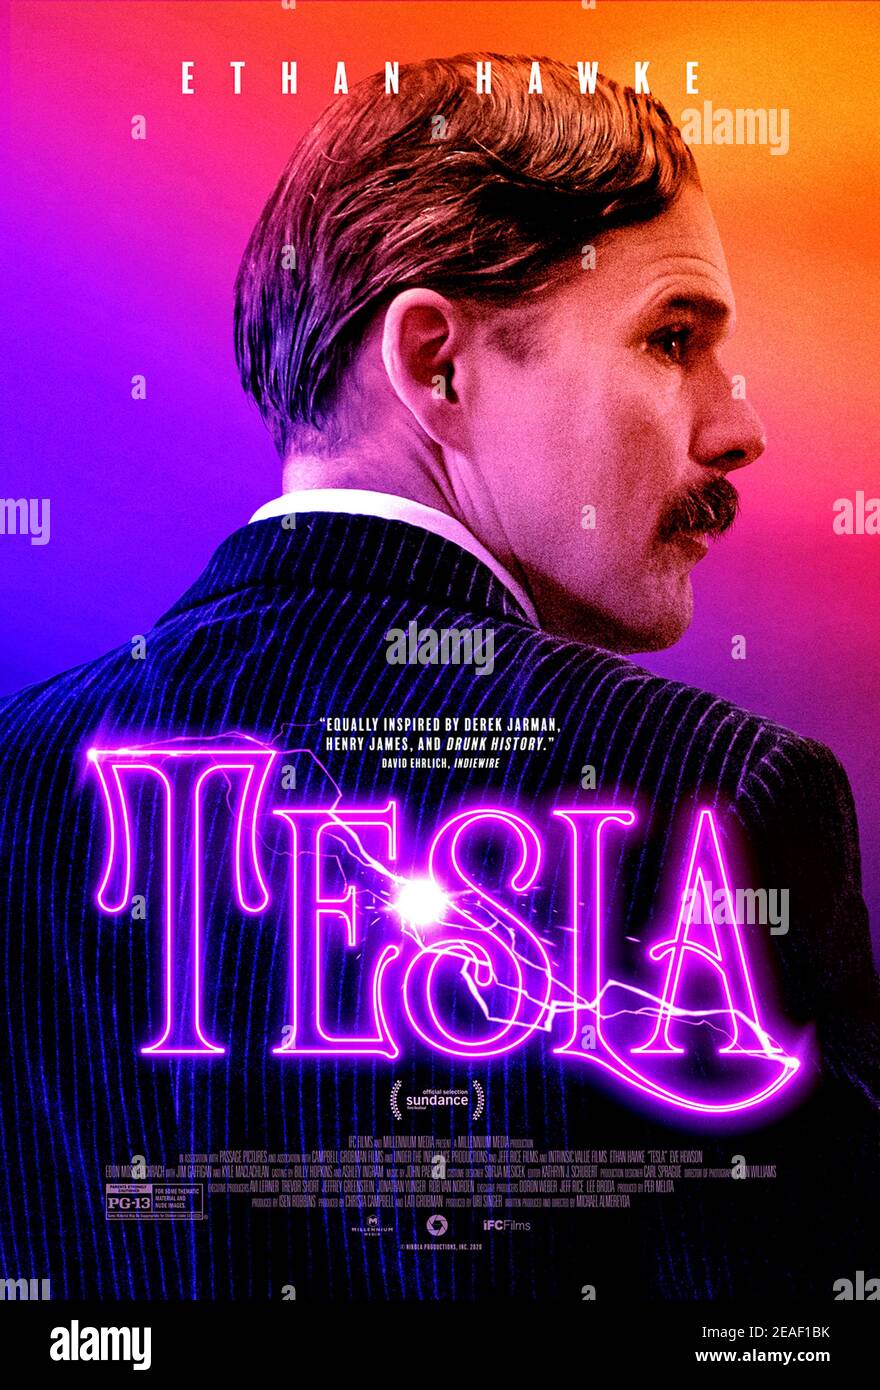 Tesla (2020) directed by Michael Almereyda and starring Ethan Hawke, Eve Hewson and Eli A. Smith. Bio pic about visionary inventor Nikola Tesla and his breakthroughs in transmitting electrical power and light. Stock Photo